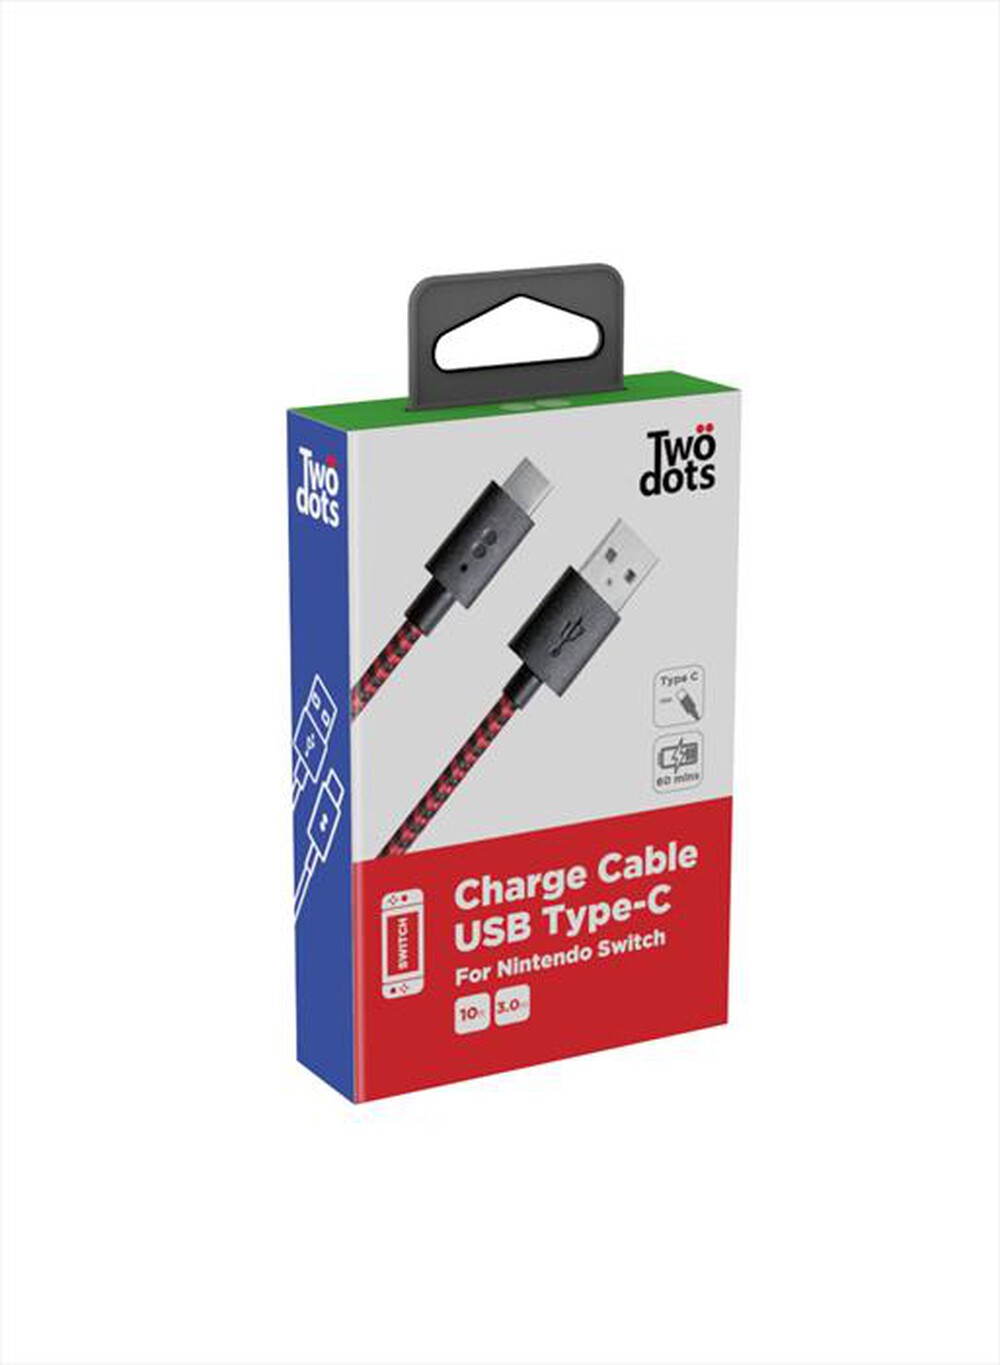 "TWODOTS - TWODOTS SWITCH CHARGE CABLE USB TIPE-C"